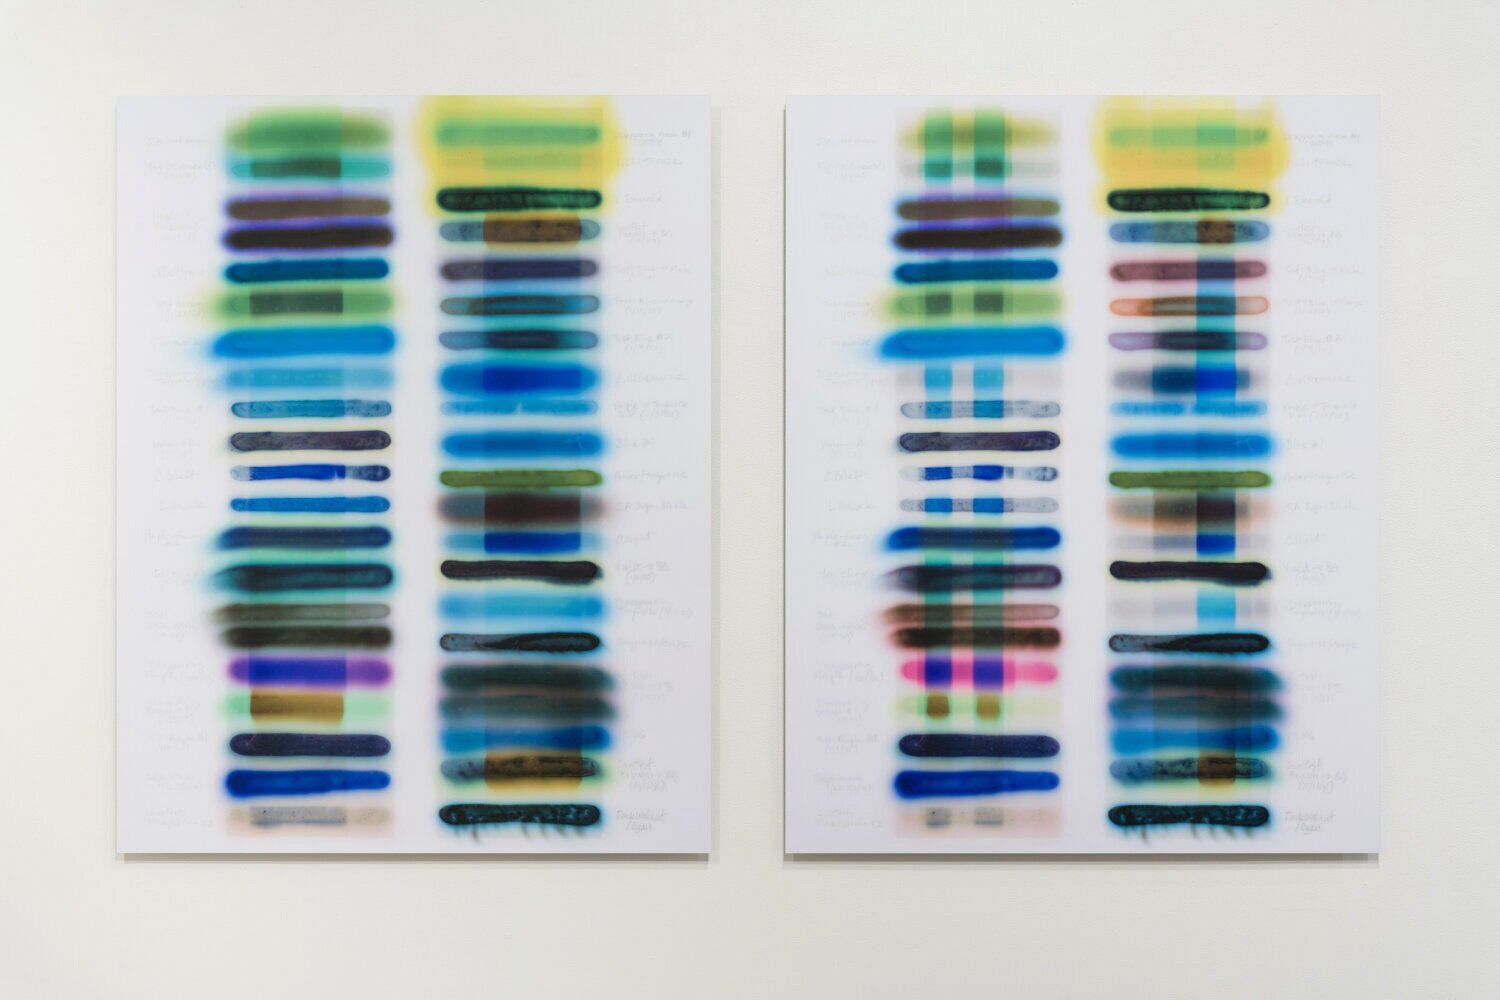   SunTest #12 (Day 5 &amp; 11) , 2020 time-based image capture; dye sublimation on aluminum 42 x 33" each (diptych) Edition of 3 